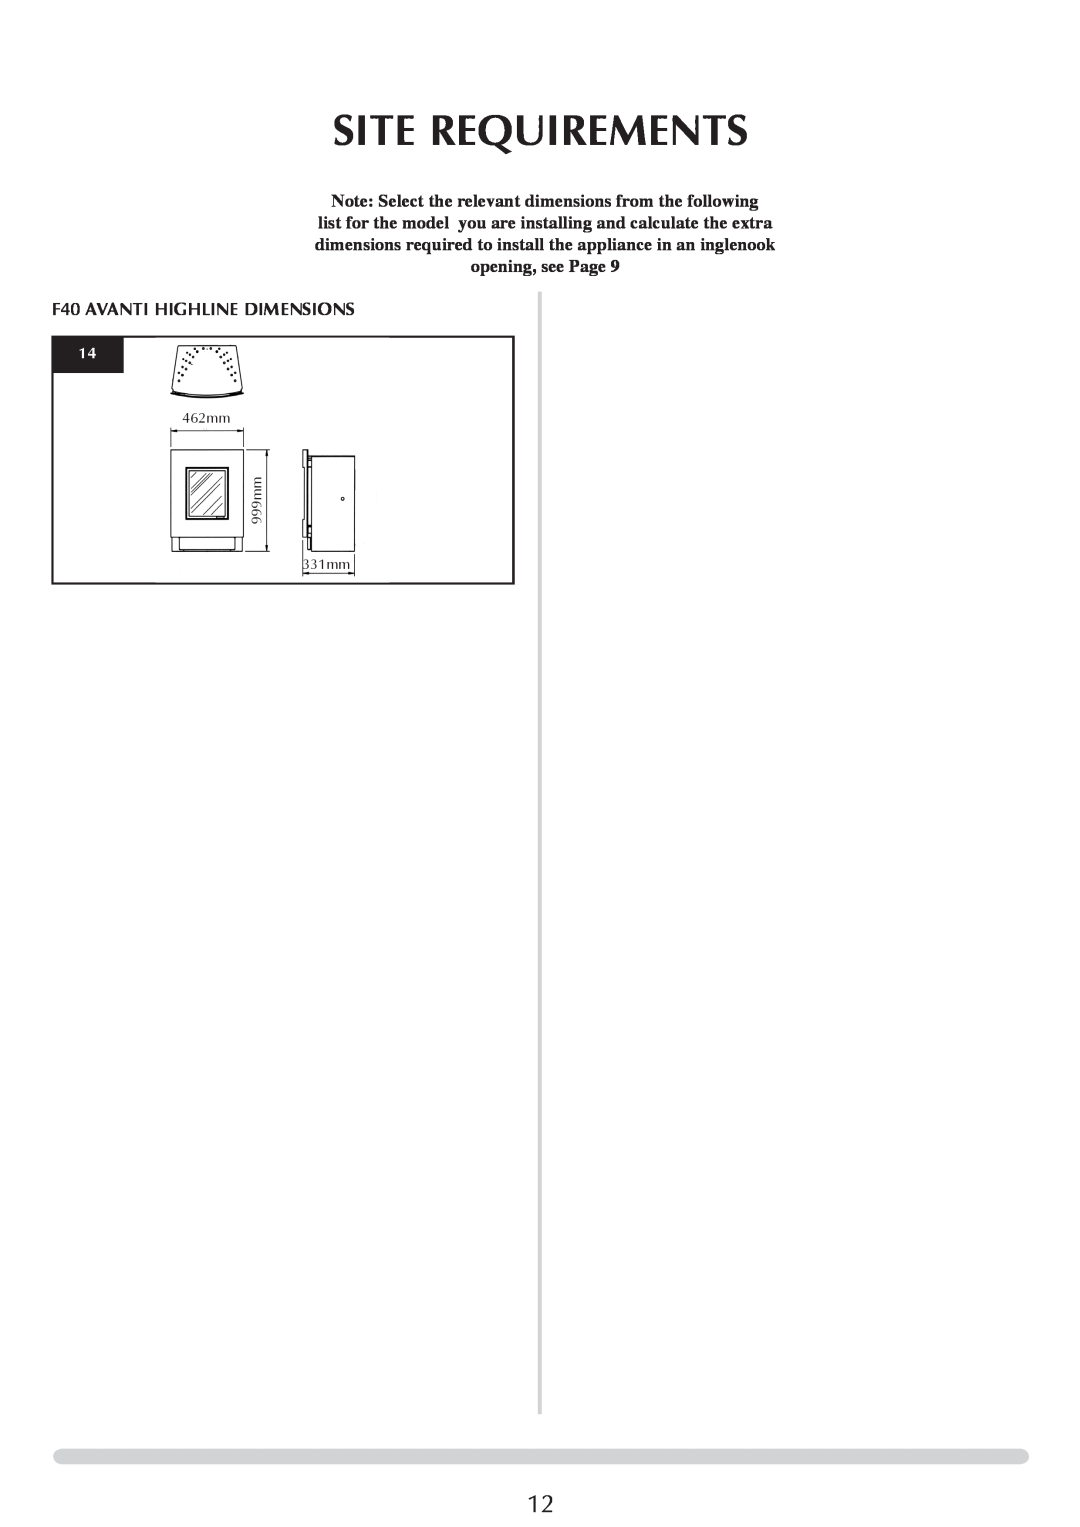 Stovax Electric Stove Range manual Site Requirements, F40 AVANTI HIGHLINE DIMENSIONS, 462mm 999mm 331mm 